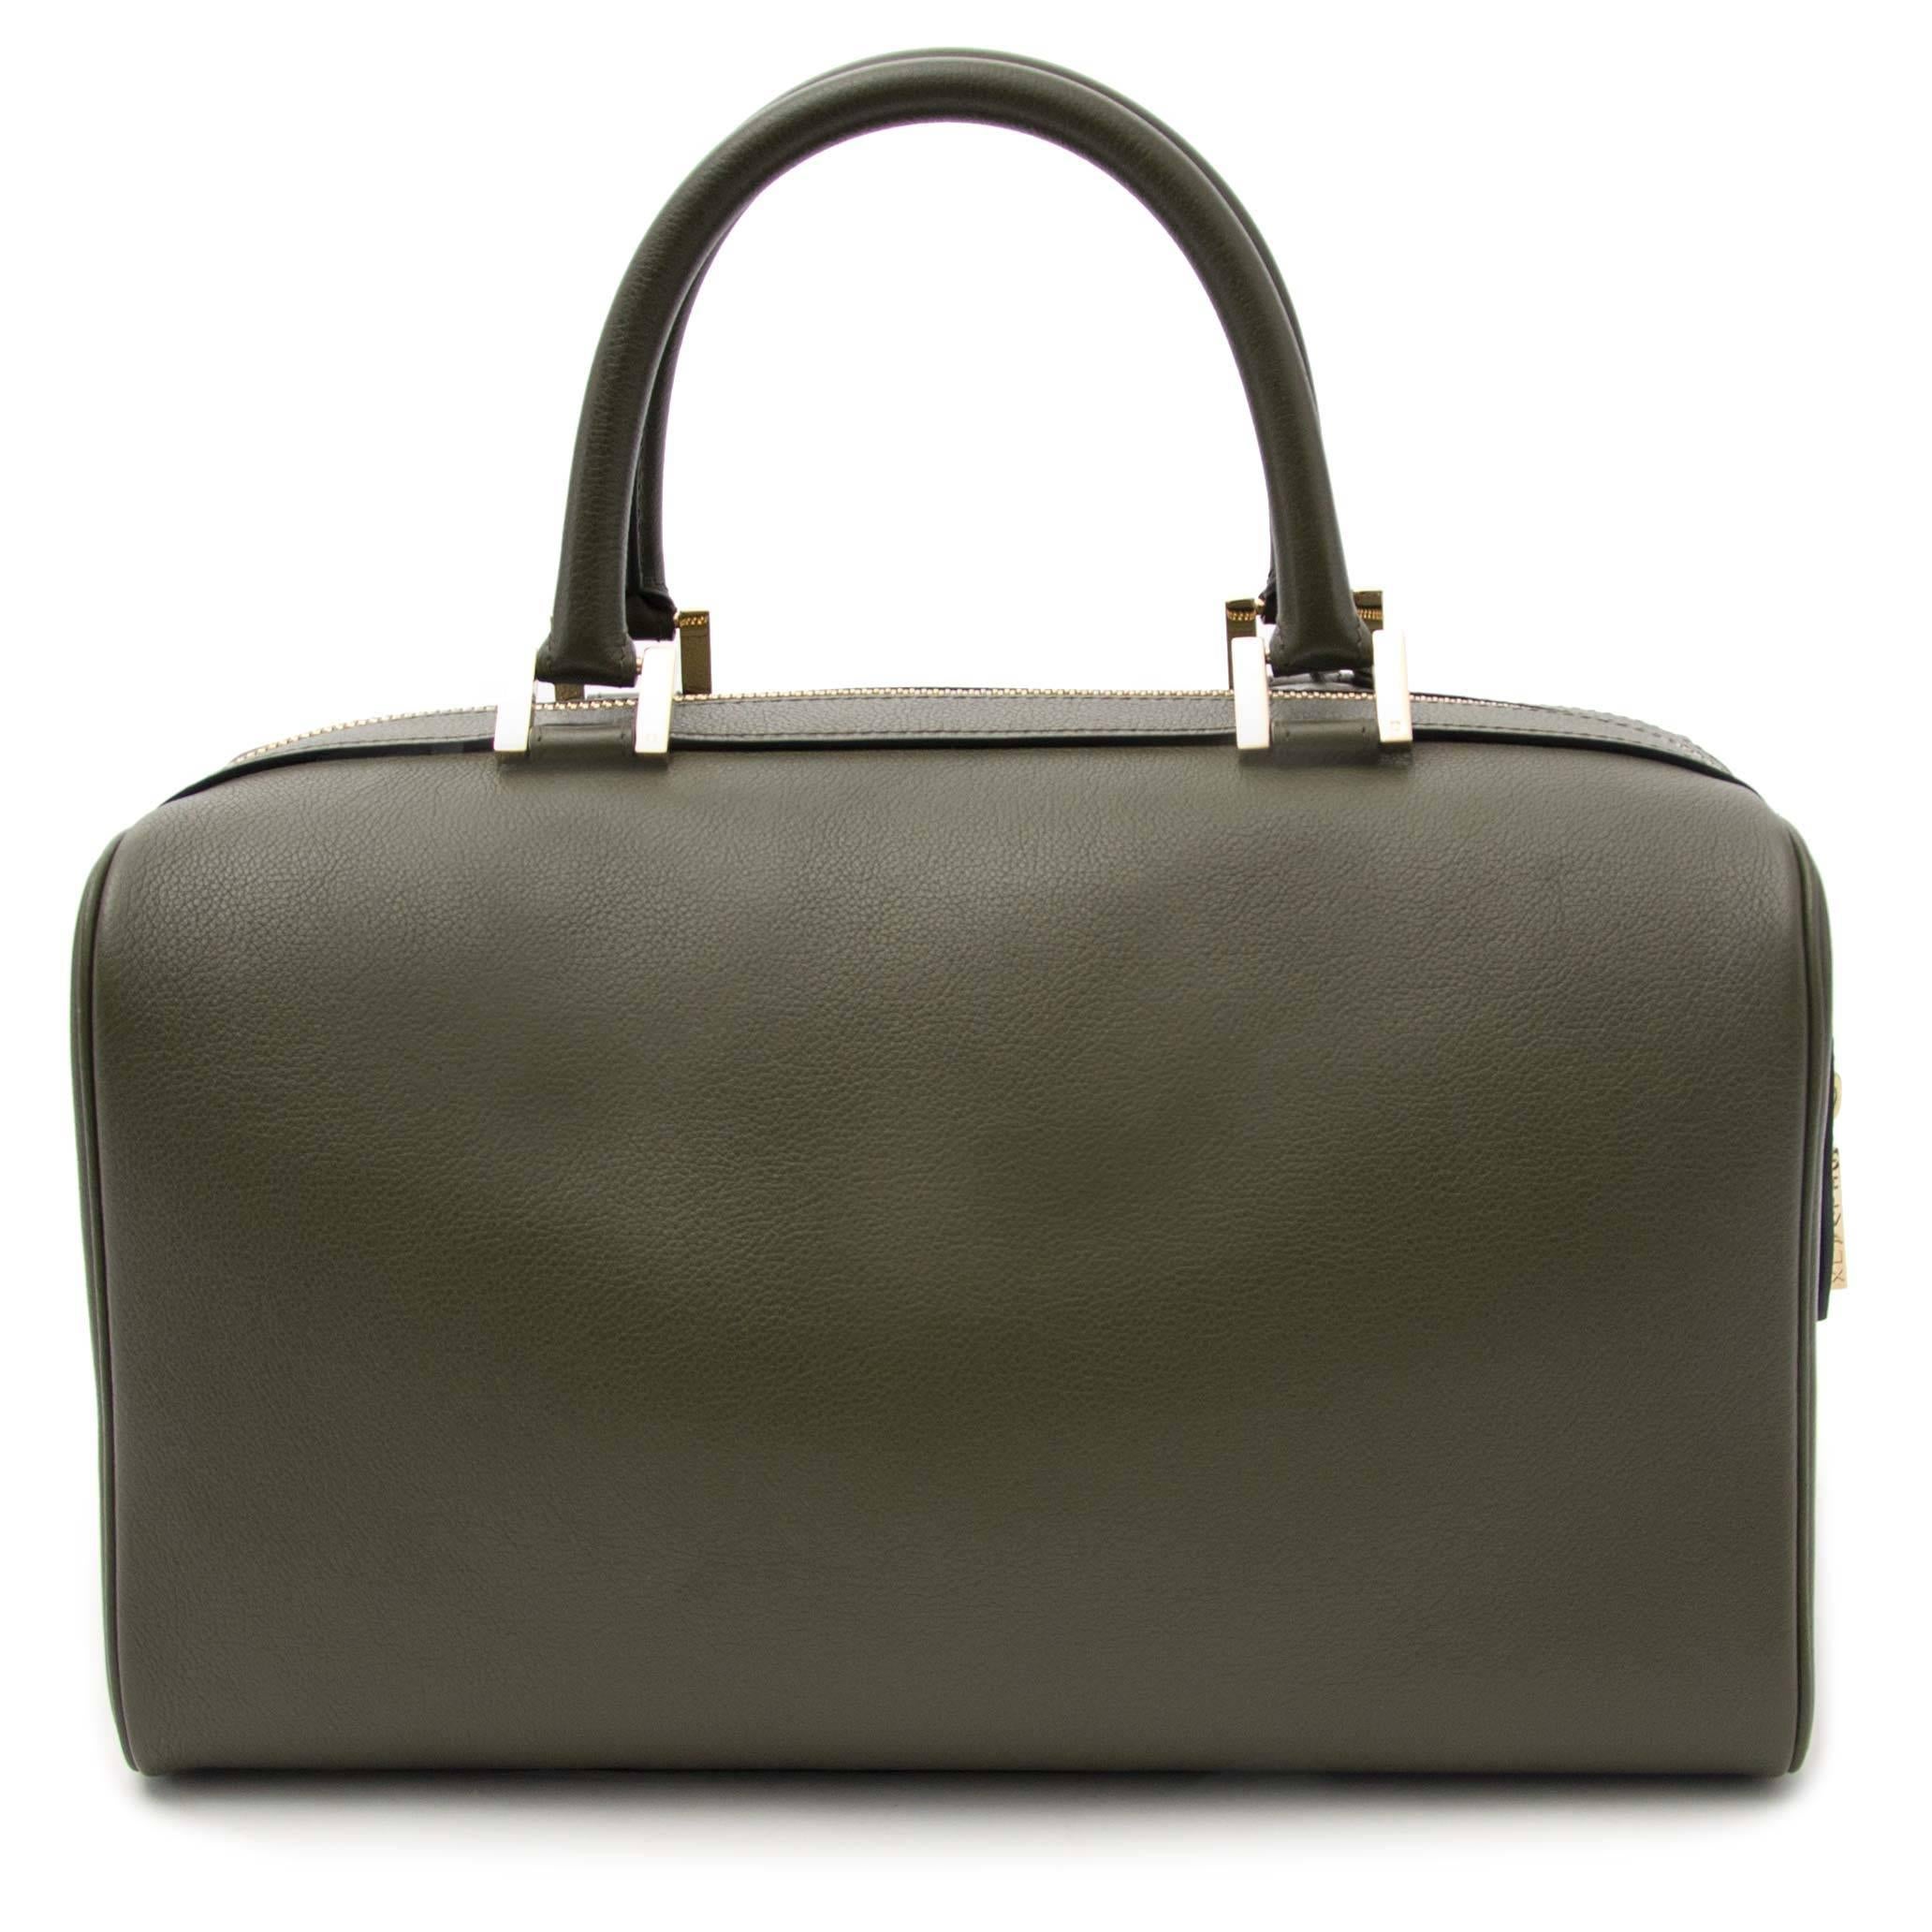 Excellent condition

Estimated Retail Price: €2400

Delvaux Louise Boston Allure Olive Green

This beautful and elegant handbag by Delvaux is a must-have in Spring and Summer. This gorgeous work of art is made out of 100% leather and the top zipper